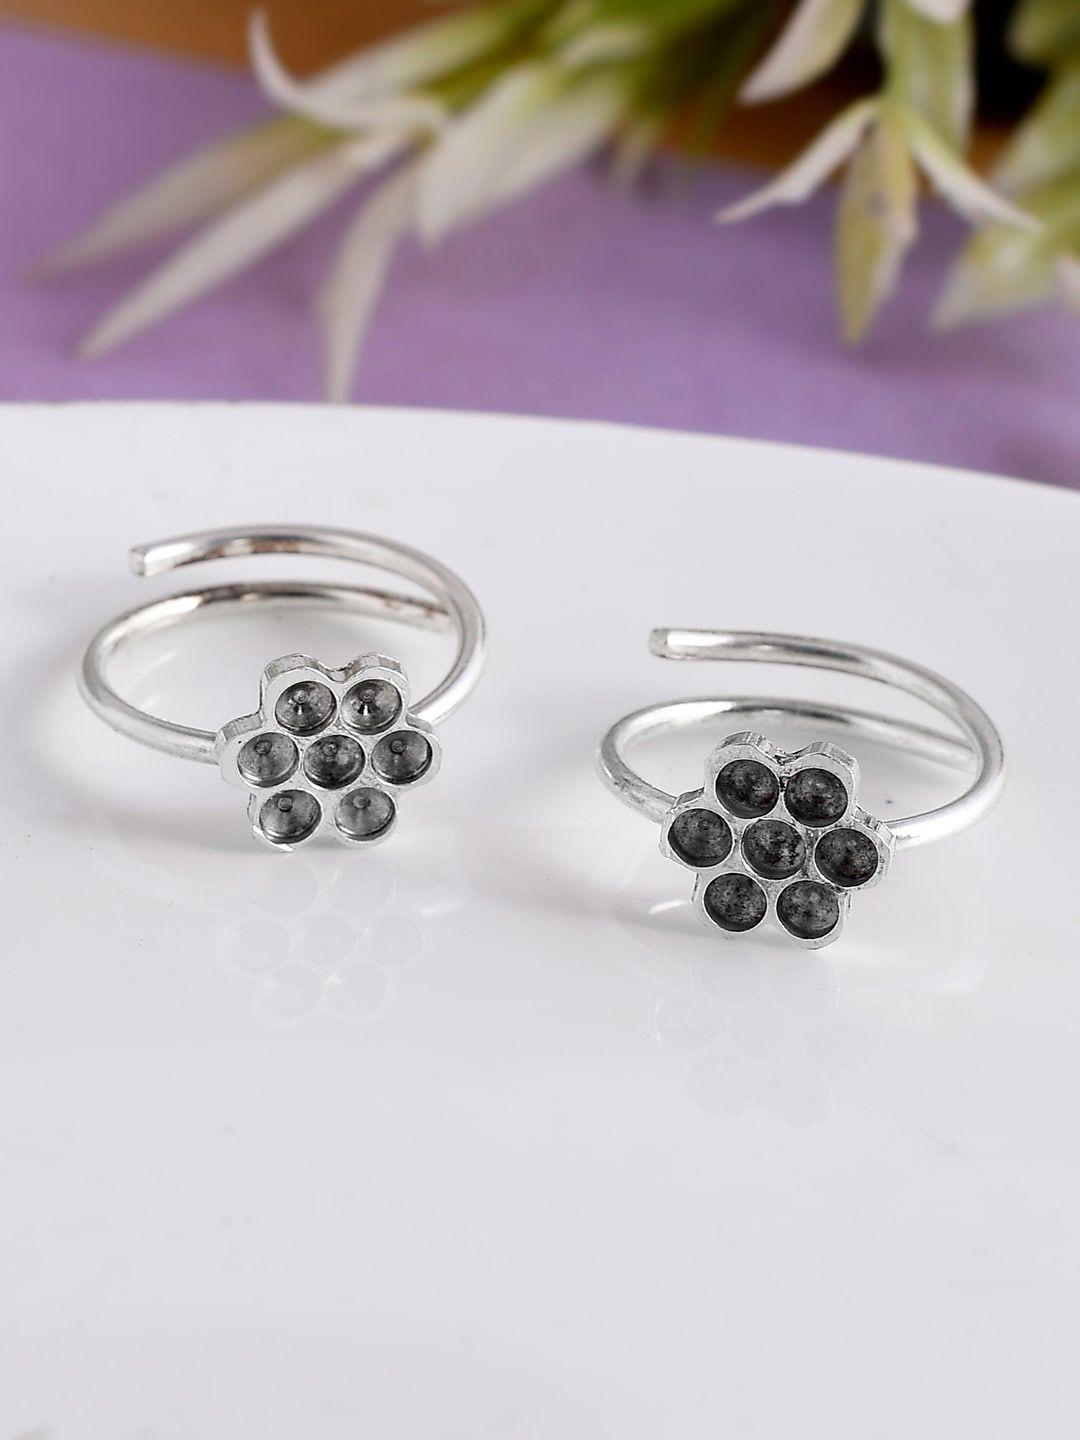 silvermerc designs silver-plated floral toe rings